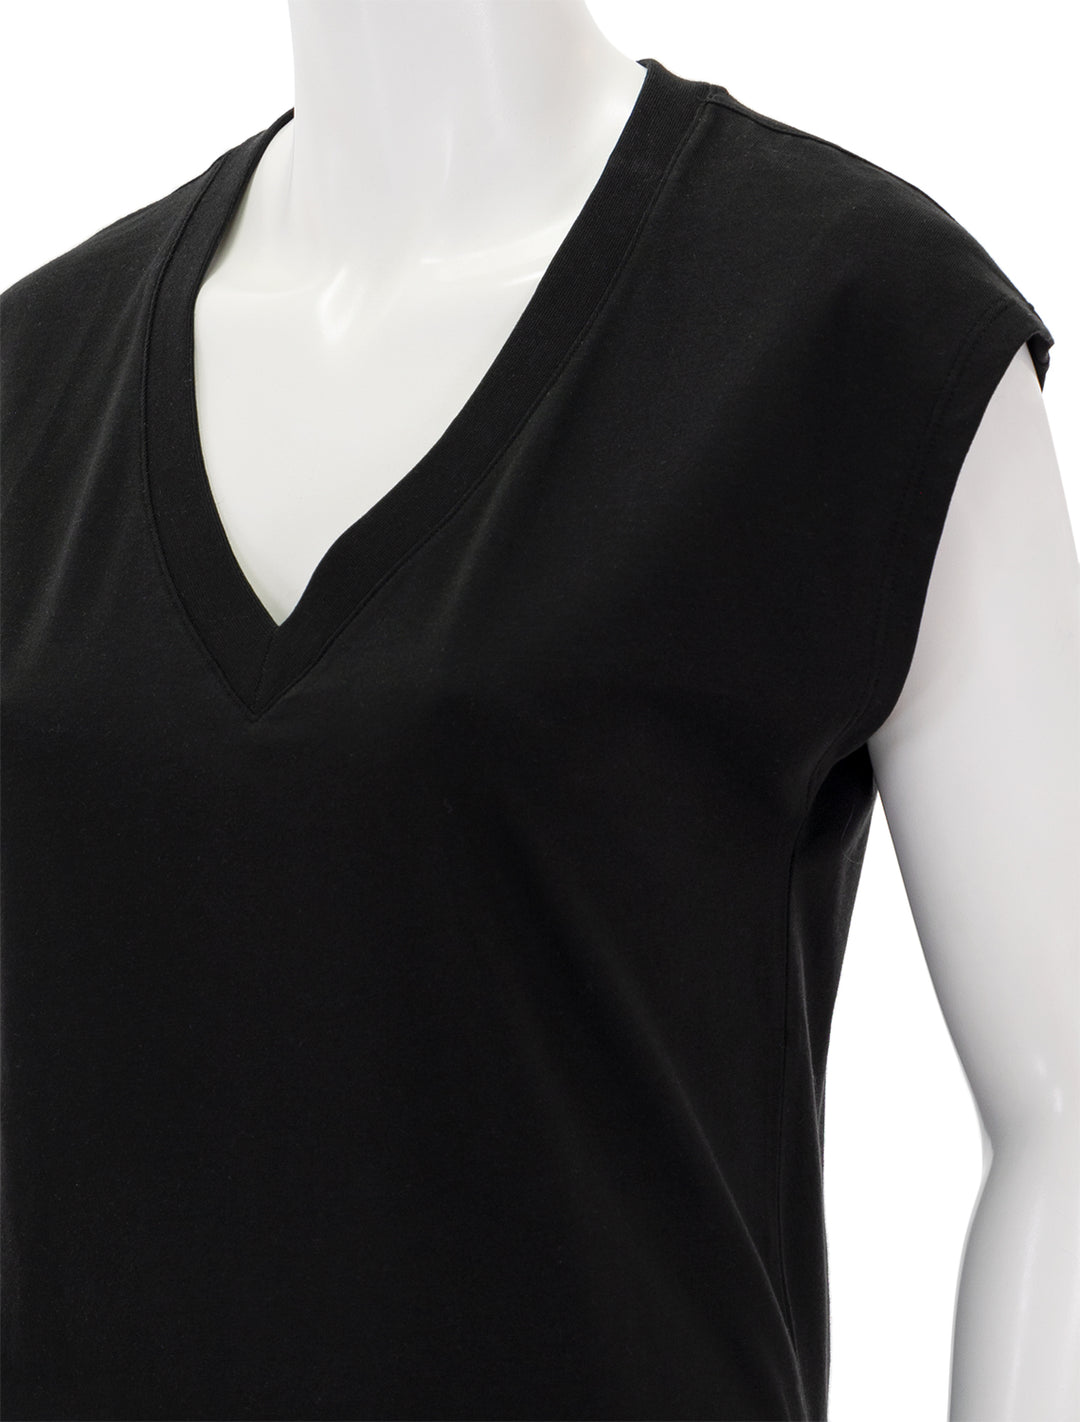 Close-up view of Patrick Assaraf's iconic vneck dolman tee in black.